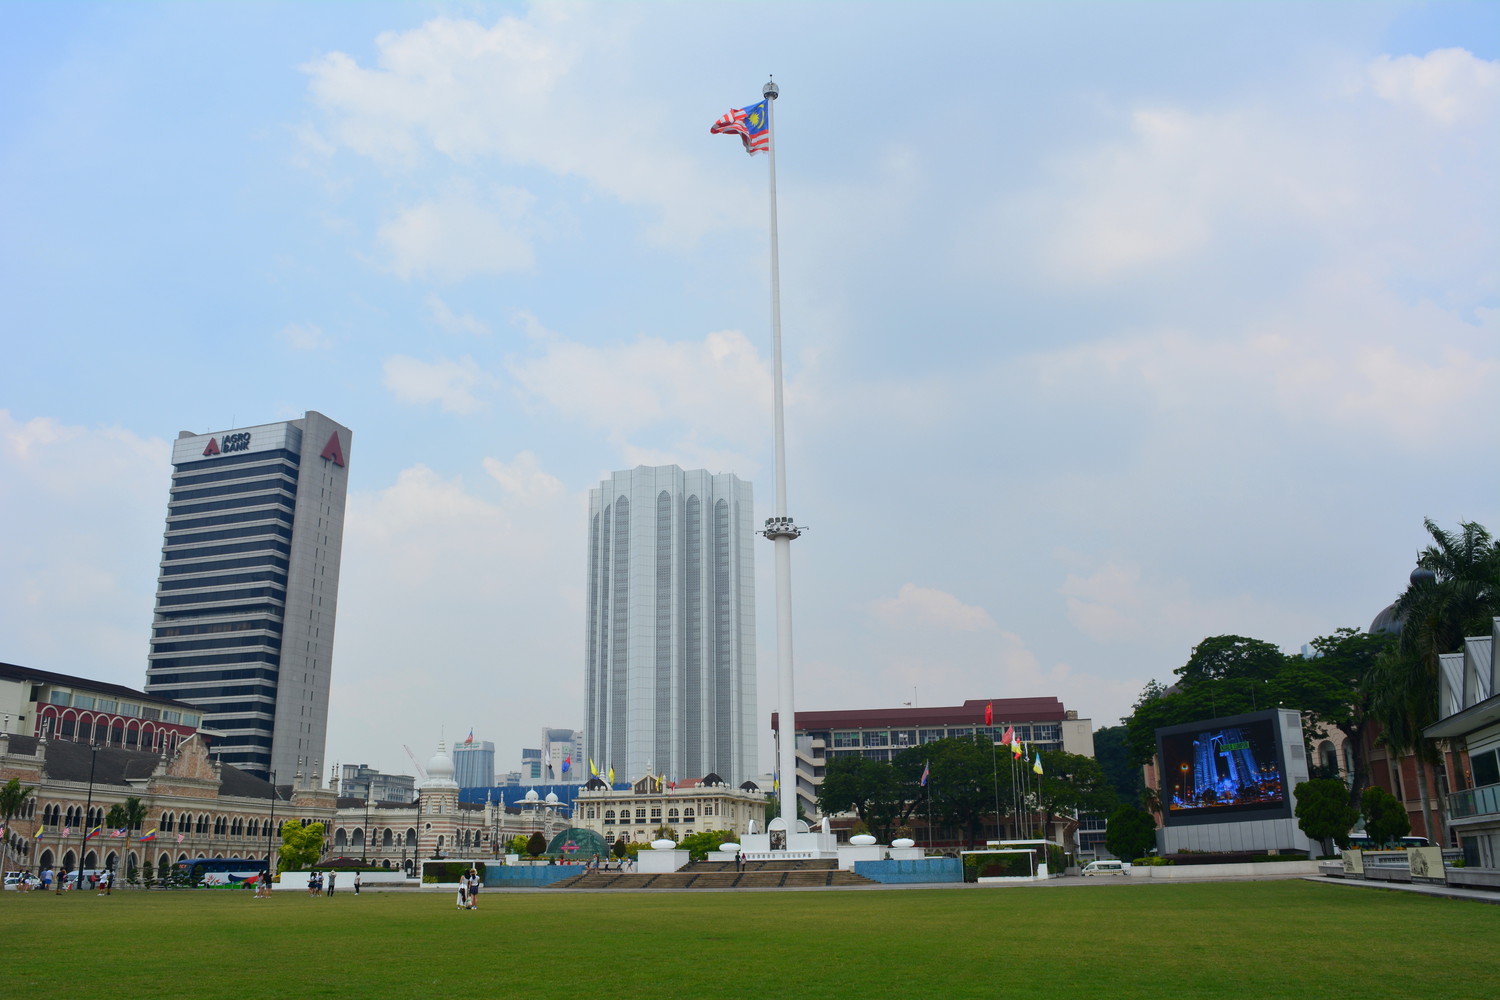 Merdeka square with green lawn and a flag pole at the centre with Malayan flag